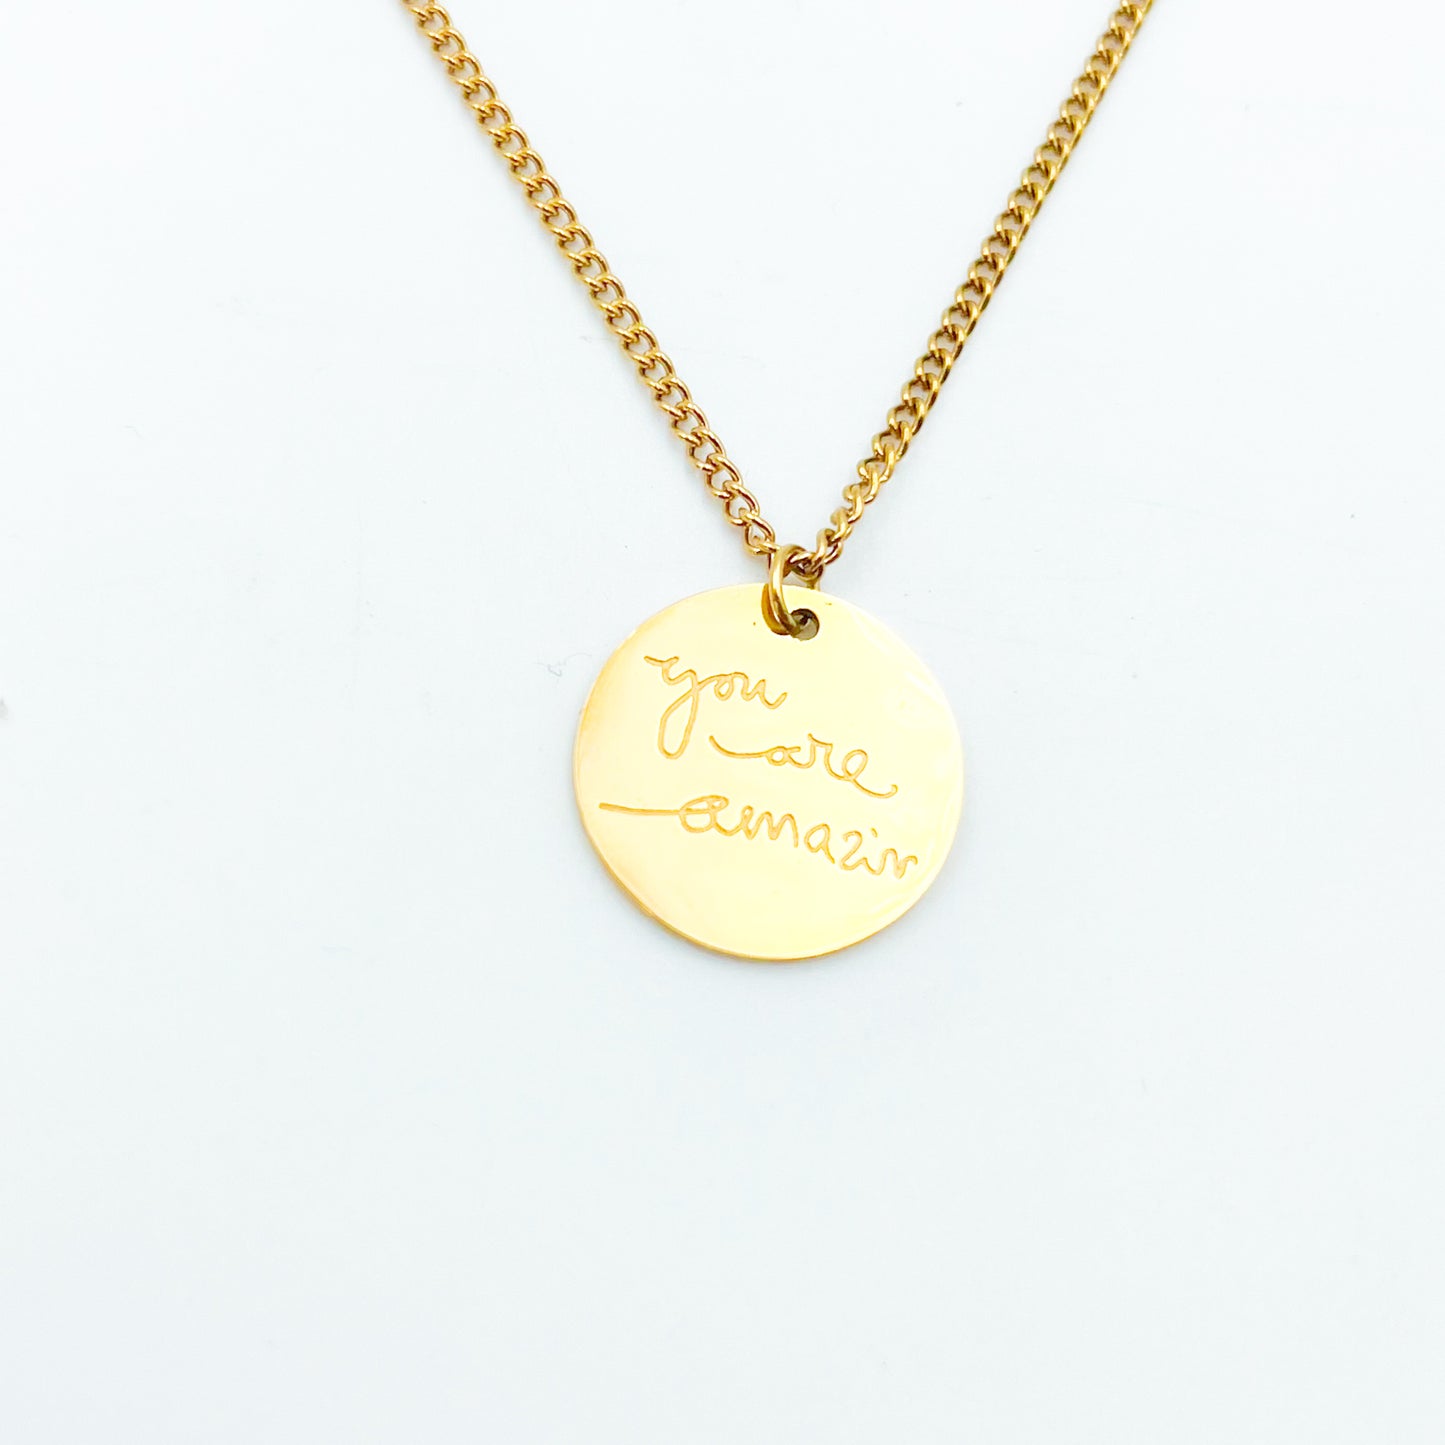 You are amazin’ golden necklace